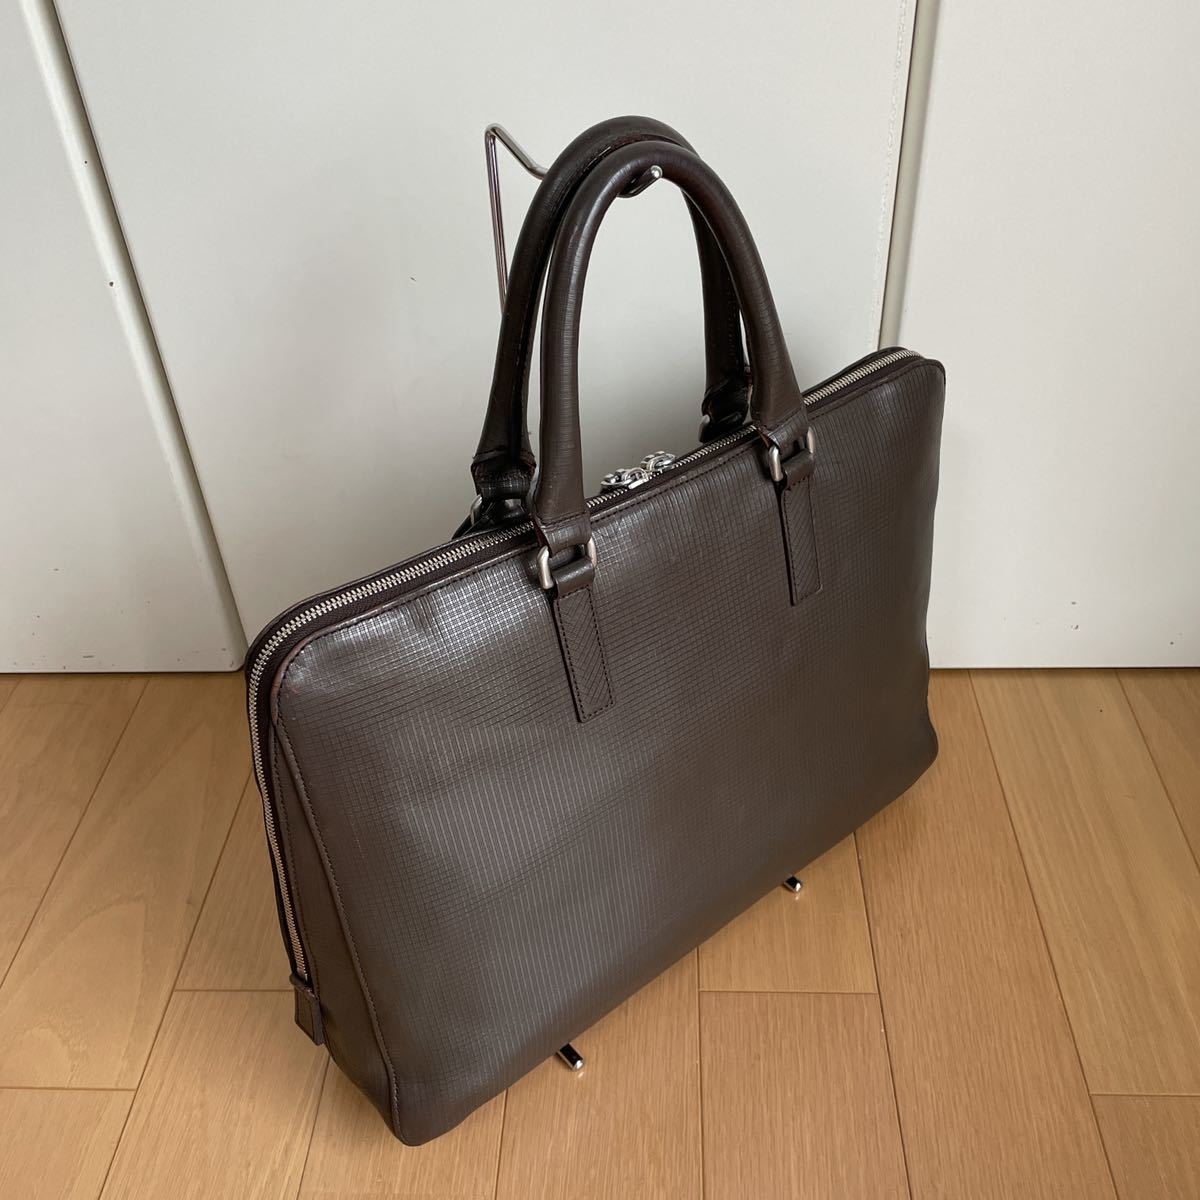 o discount negotiation welcome ani have aniary briefcase g lid leather 25-01000 used dark brown 